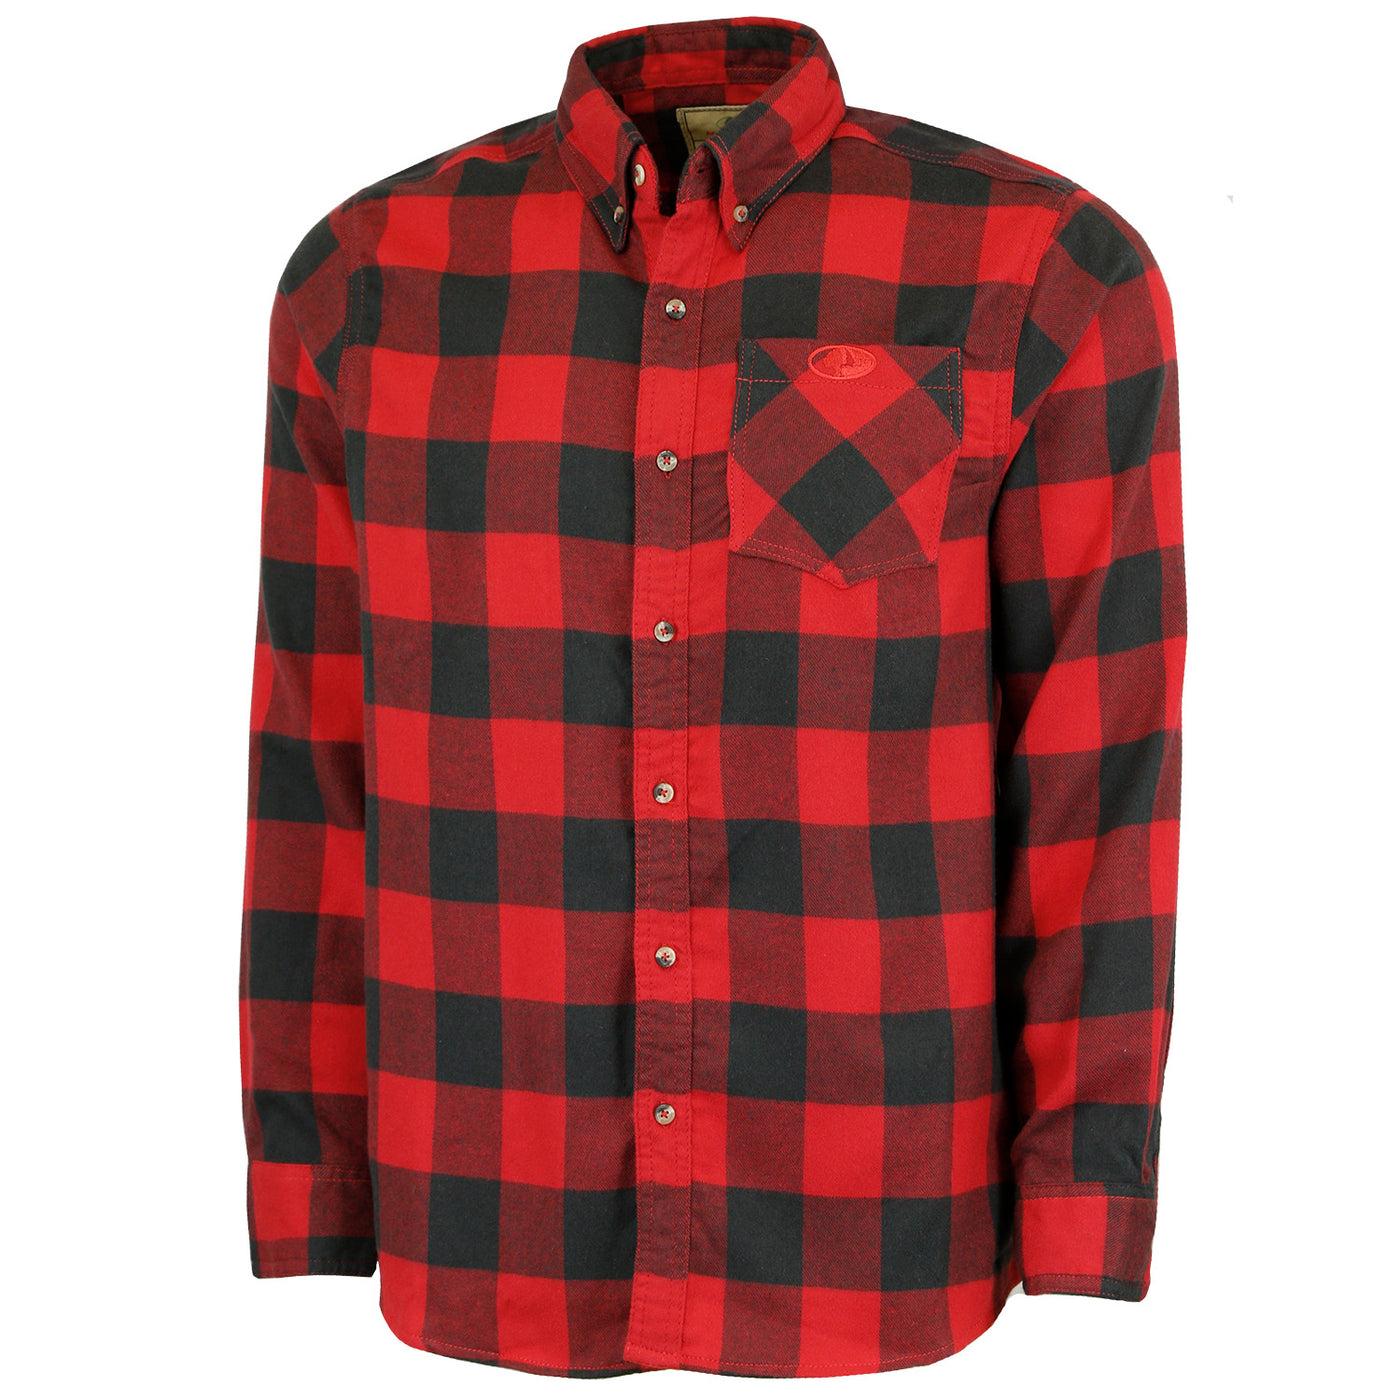 Mossy Oak Men's Thermal Lined Plaid Flannel Long Sleeve Button Down Shirt Red Buffalo Front